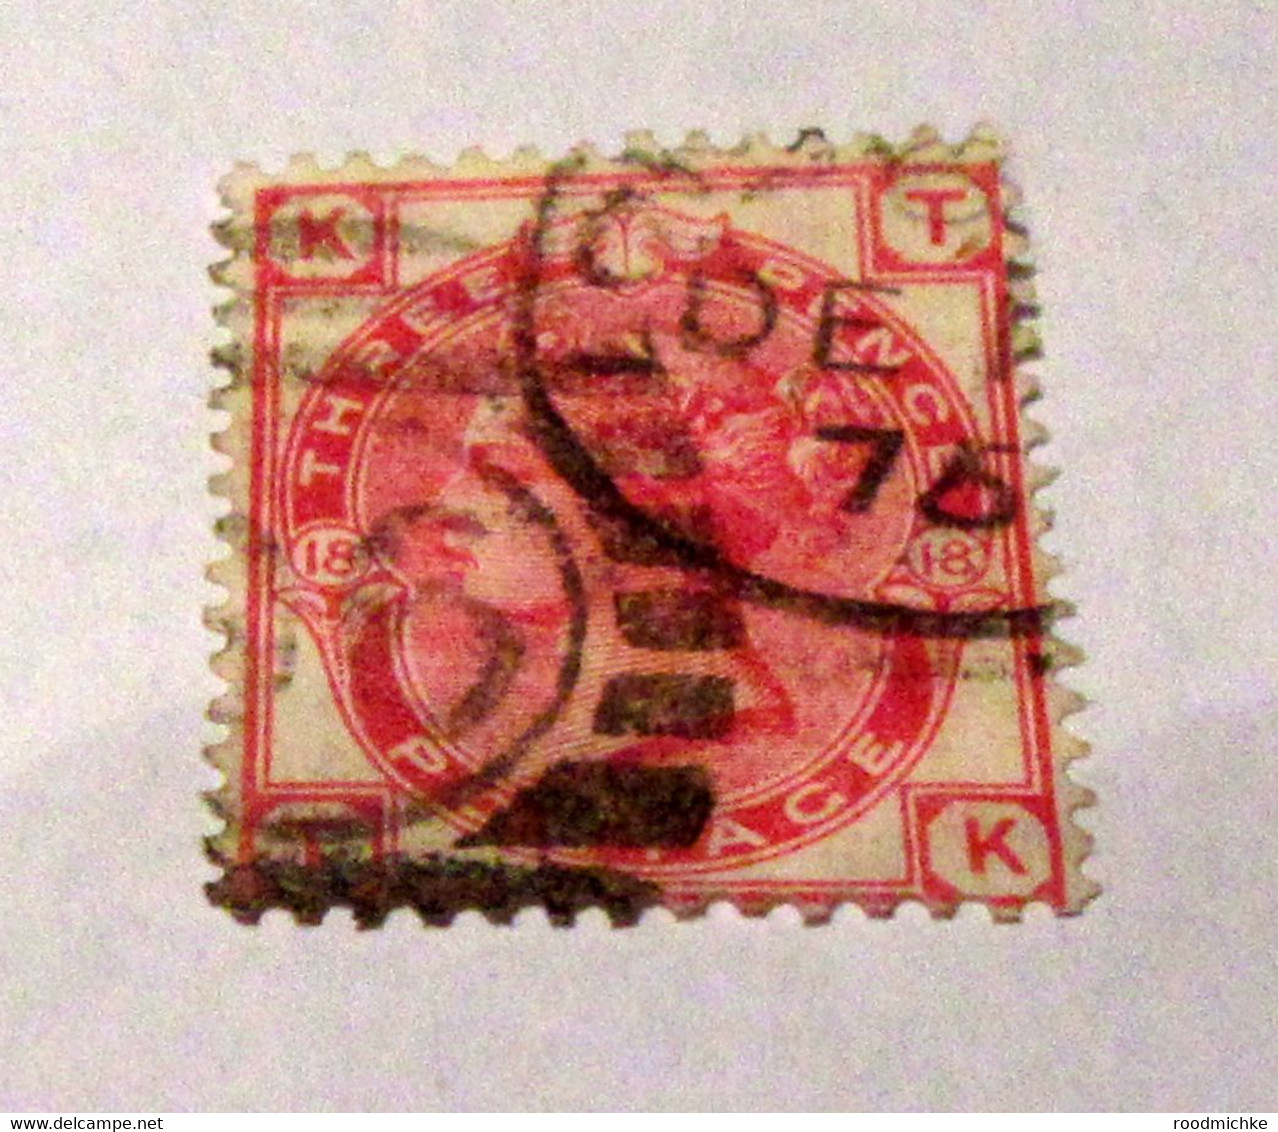 QUEEN VICTORIA SG 143 PLATE 18  USED - Unclassified